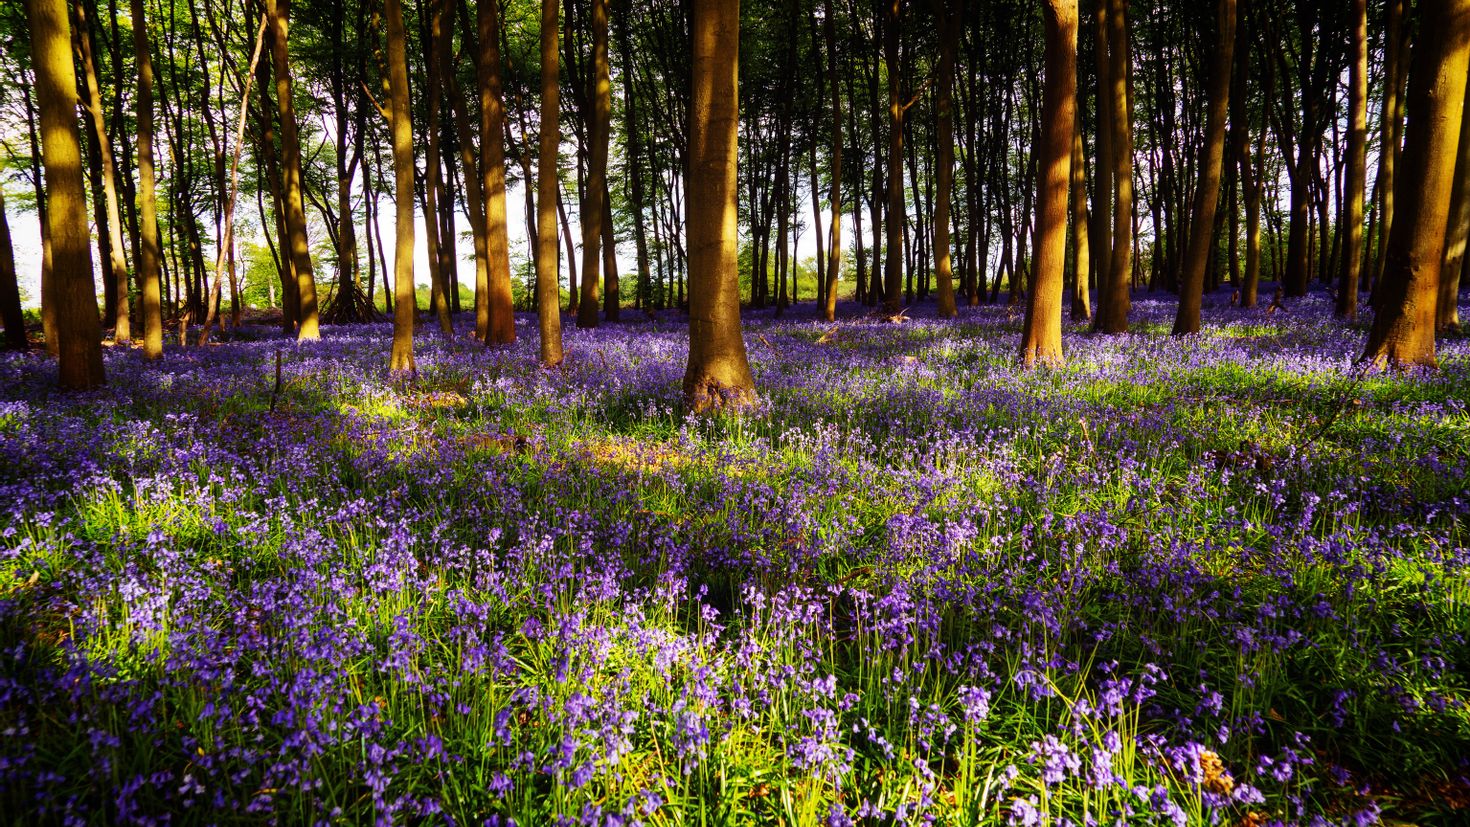 Meadows of Bluebells